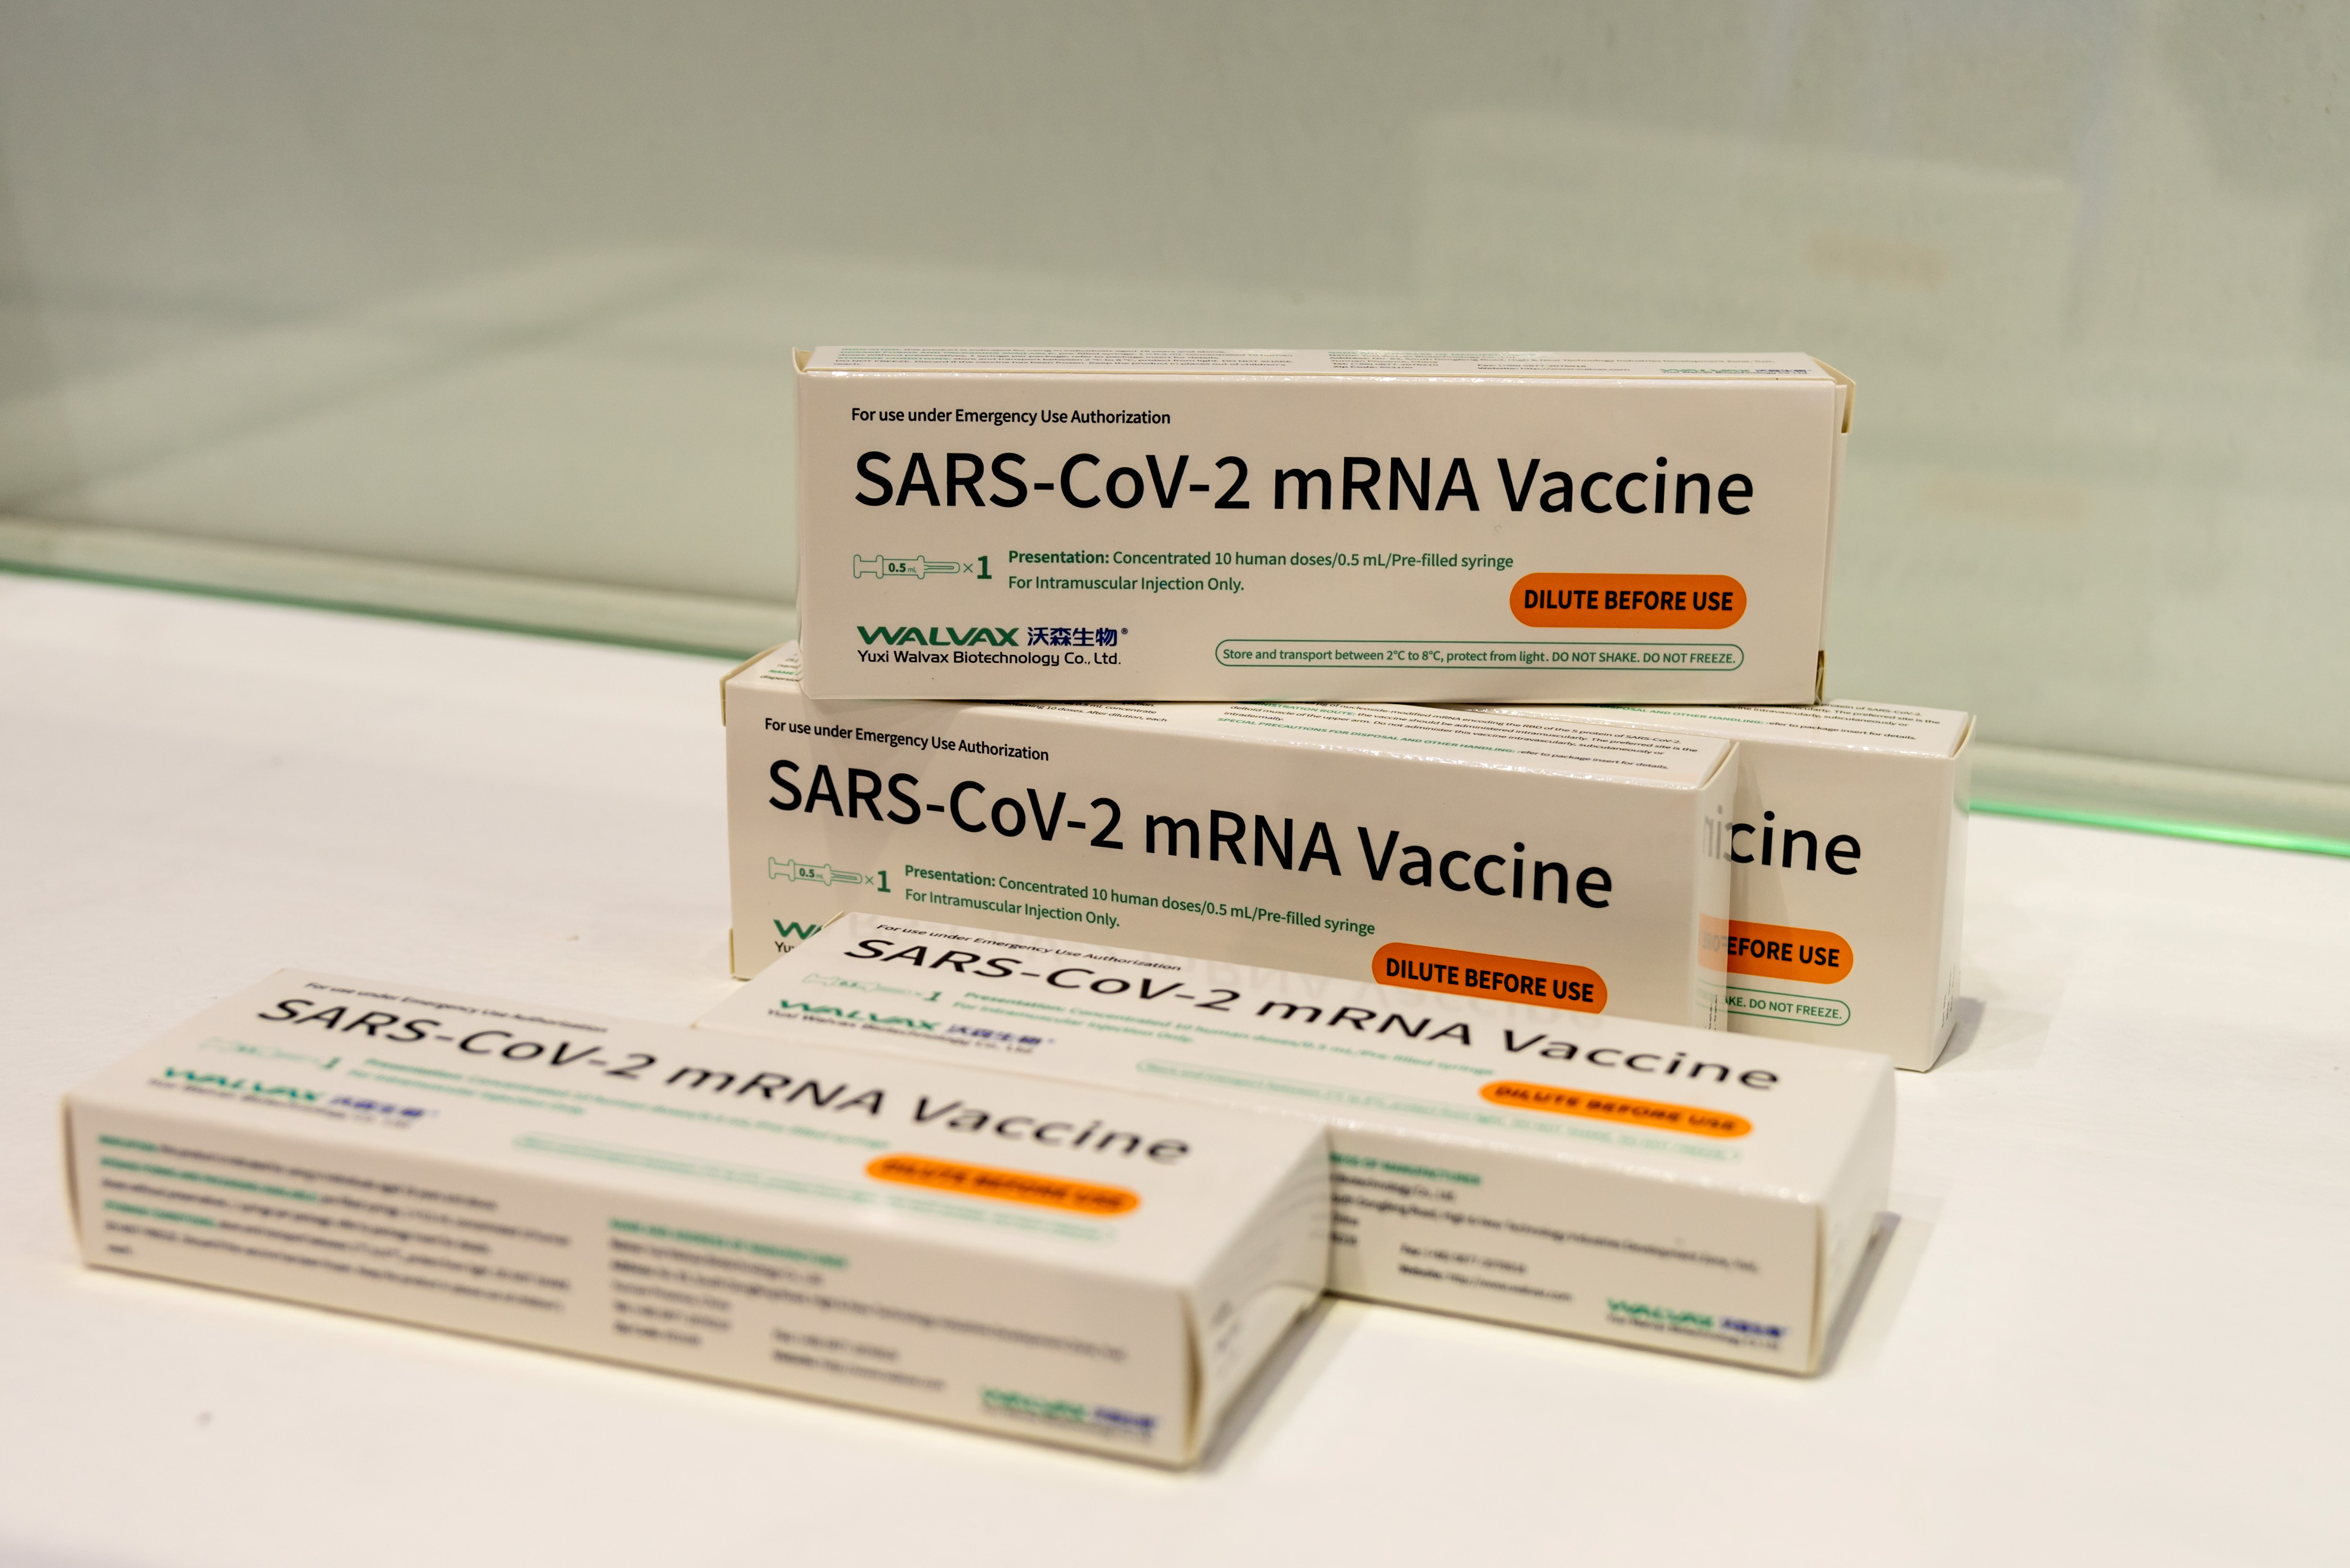 Boxes of Walvax Biotechnology's mRNA COVID-19 vaccine are displayed at a trade fair in Shanghai